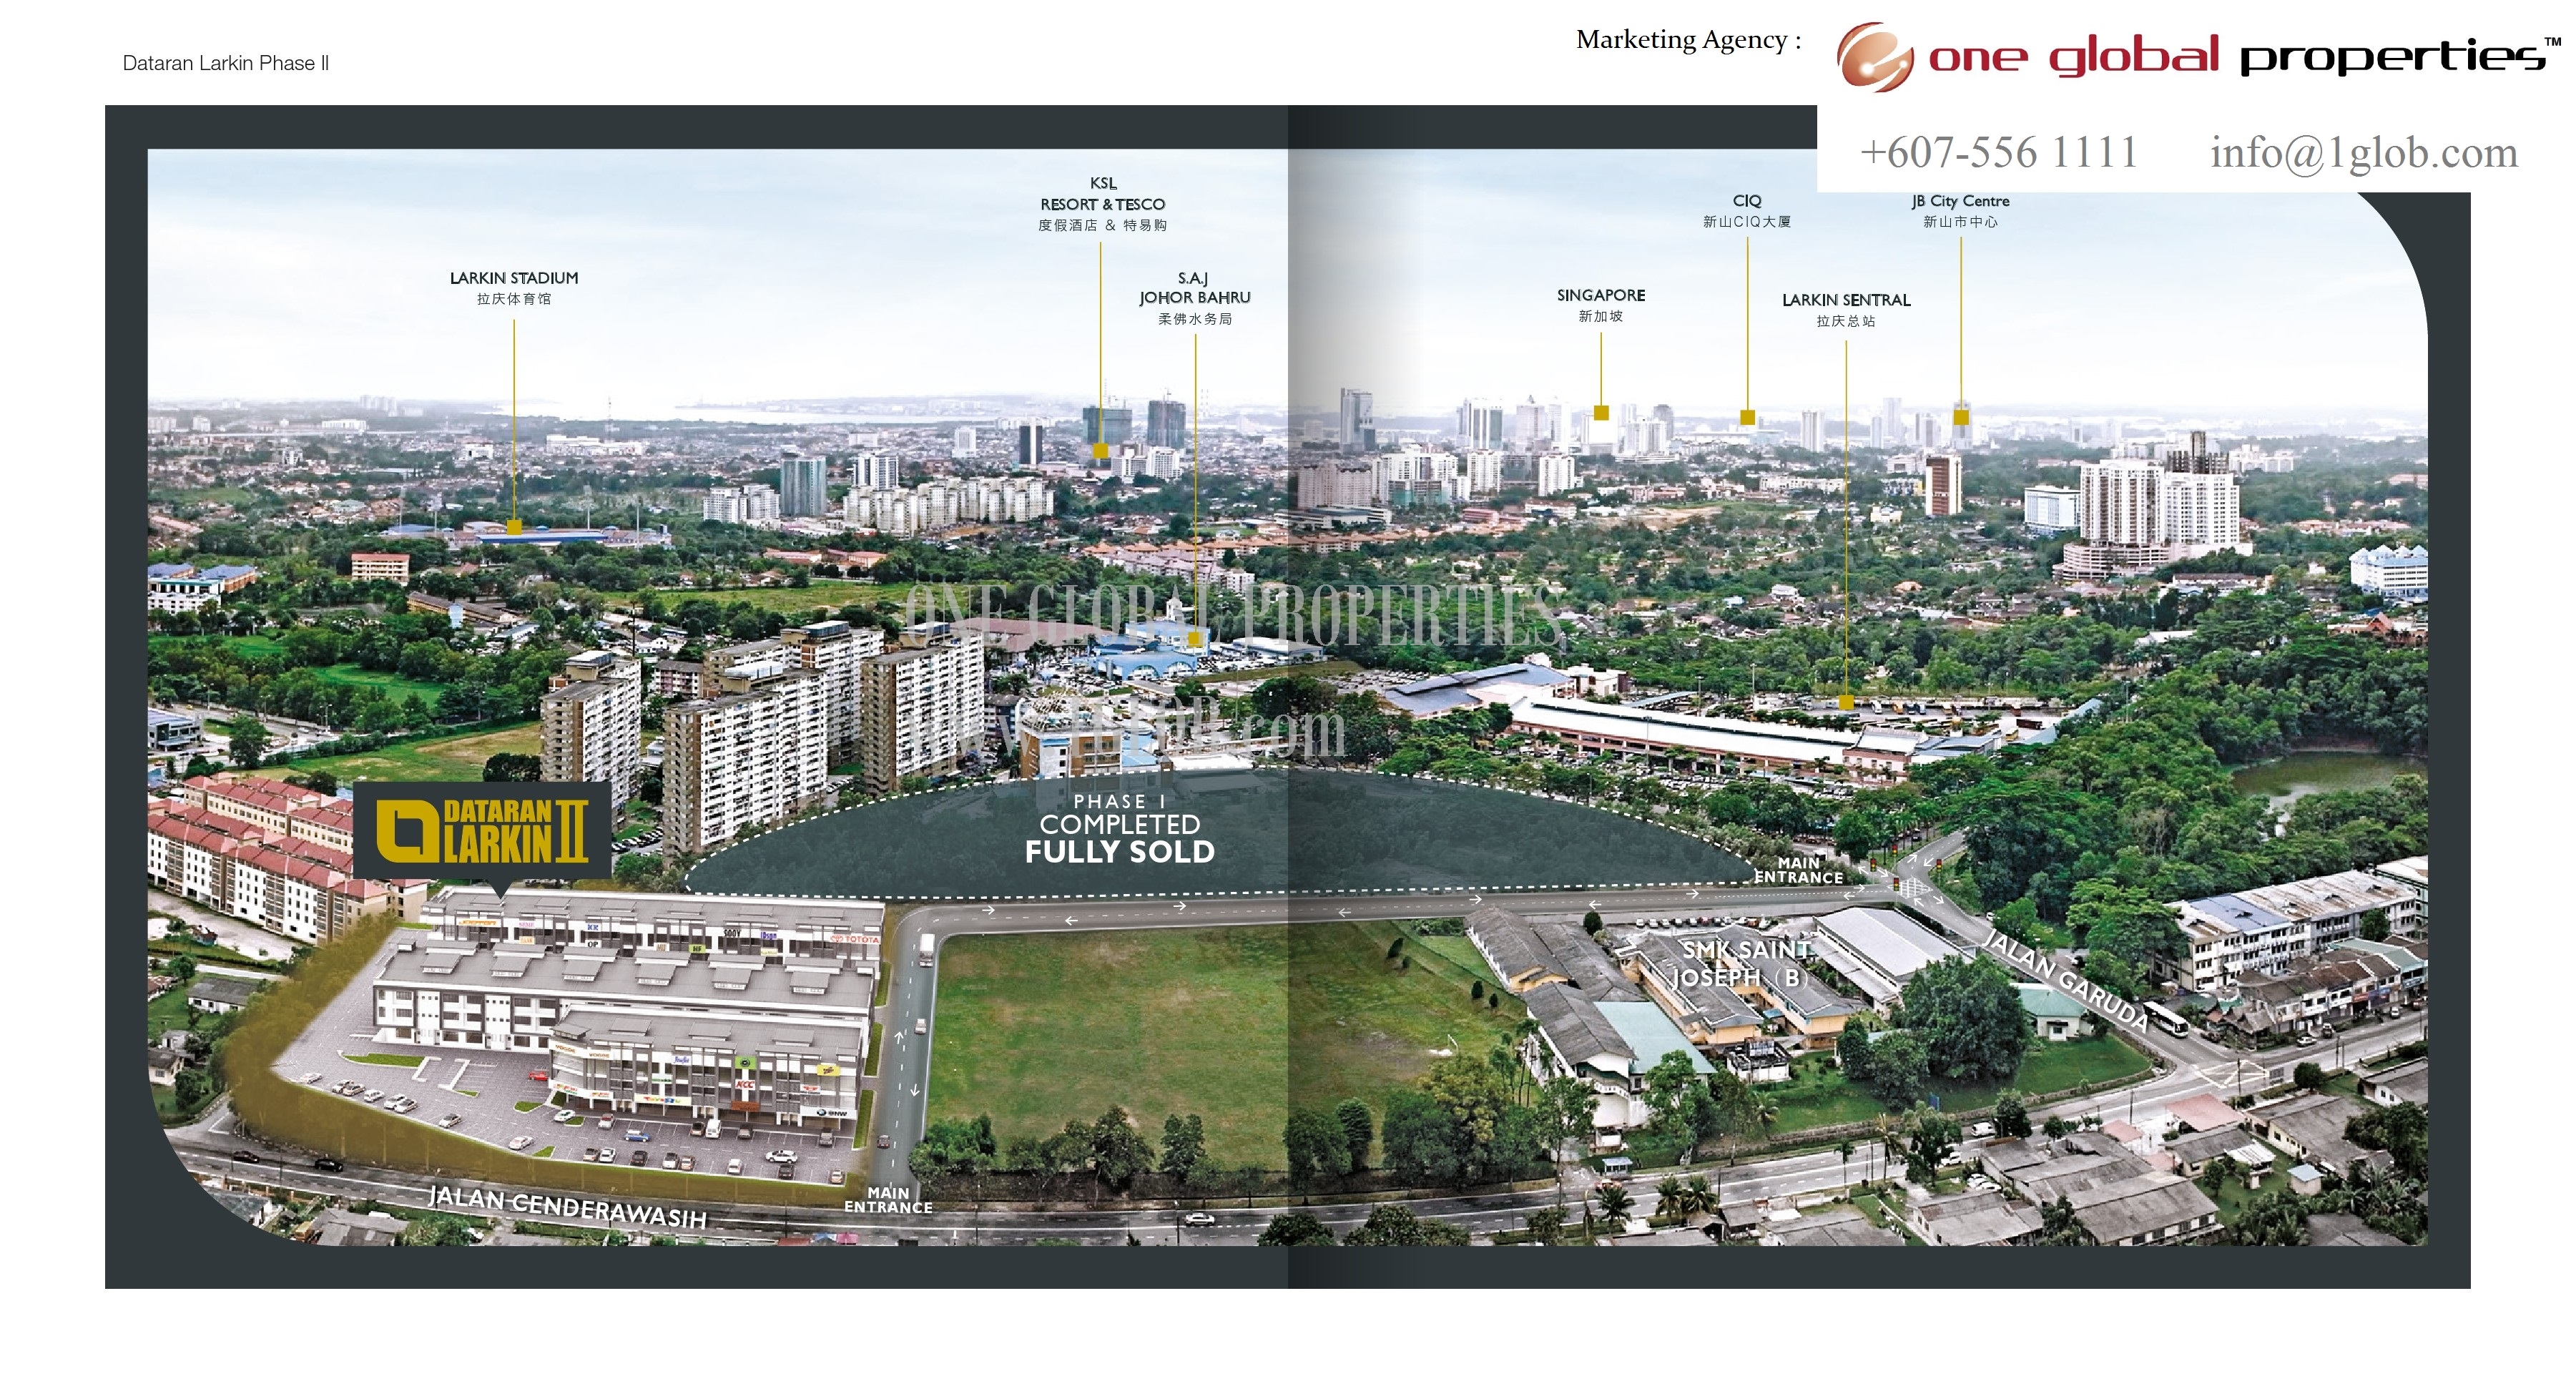 Dataran Larkin Project Brochure Page 2 (This link will open a PDF document)